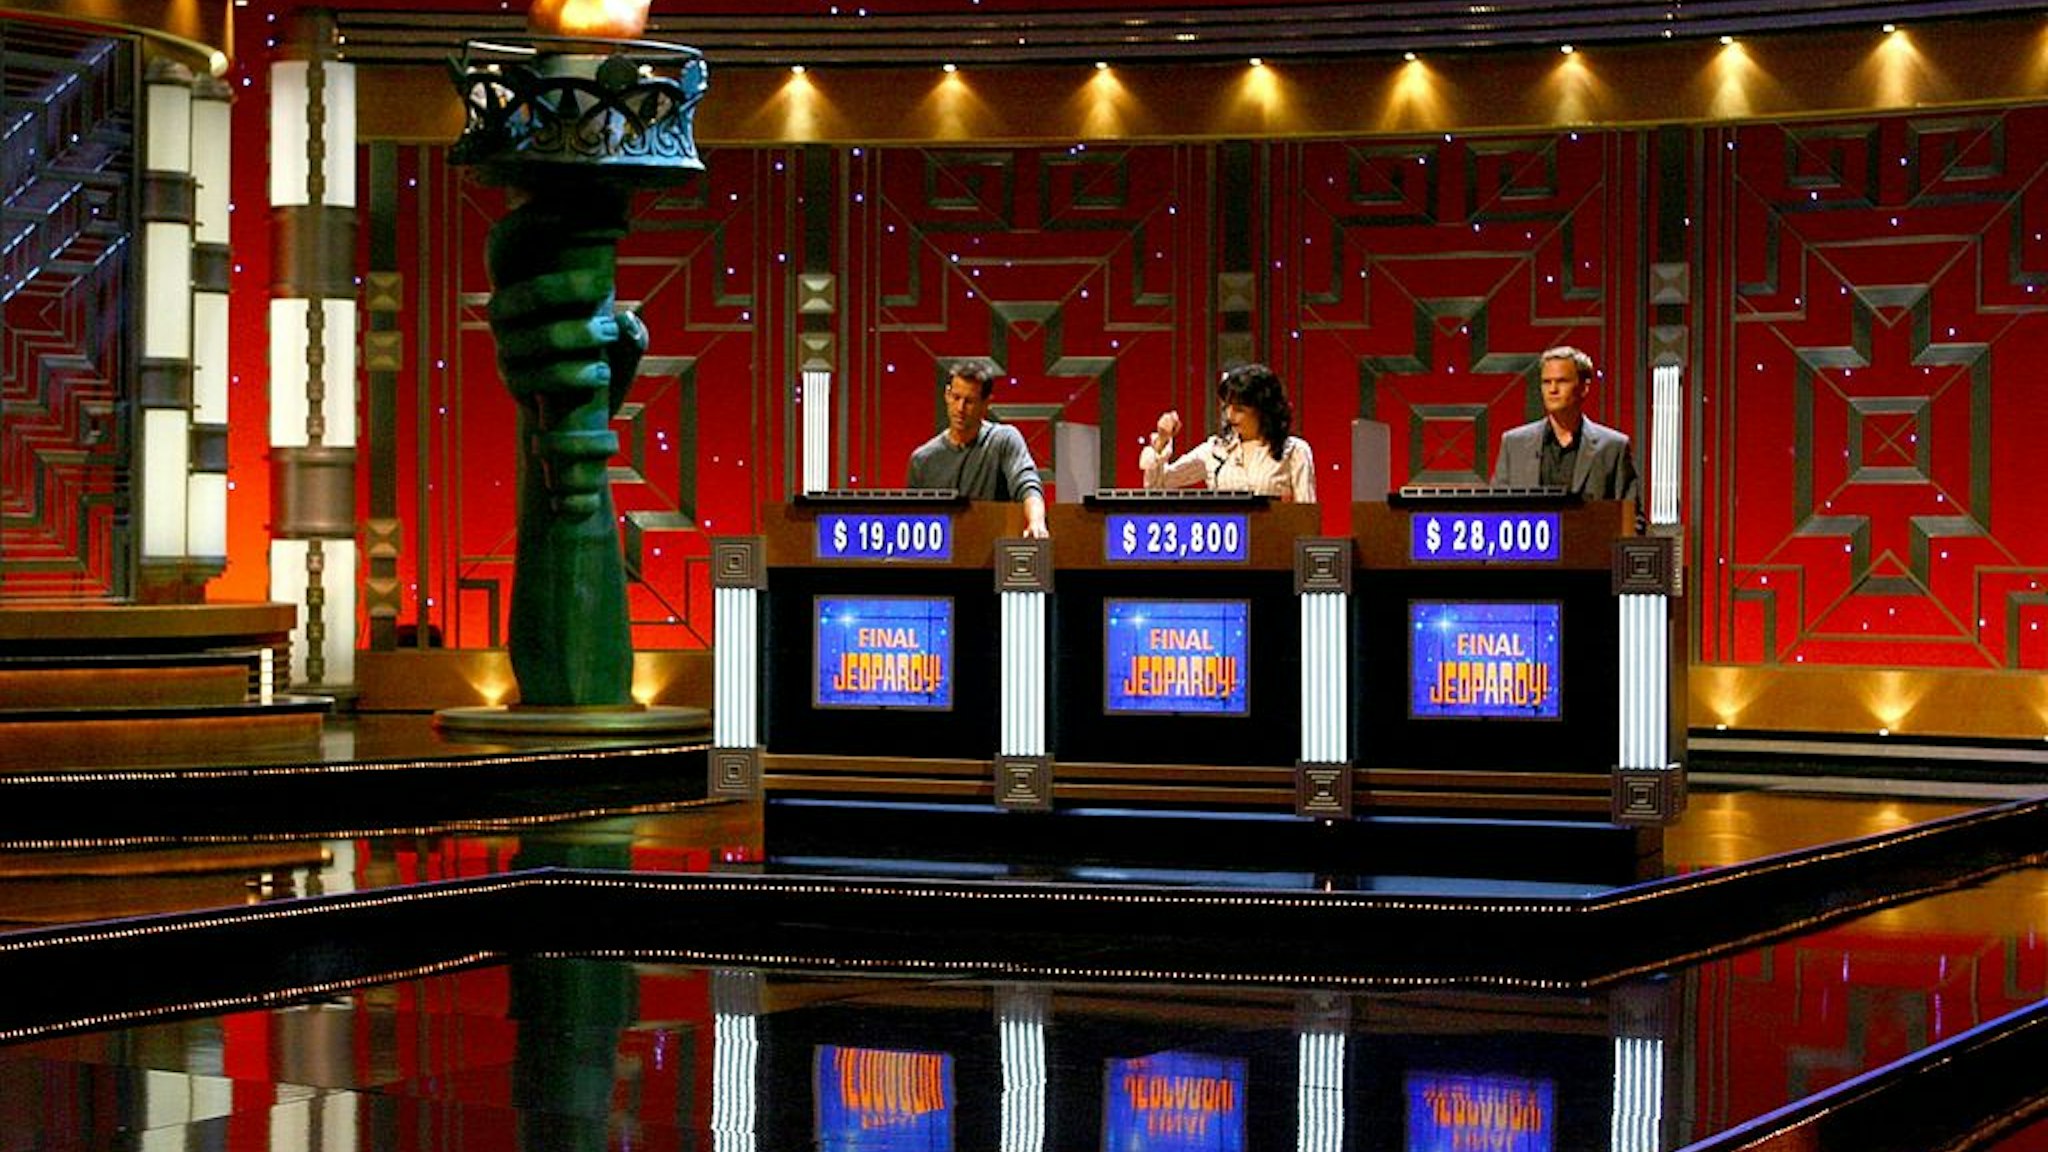 Actors James Denton, Bebe Neuwirth and Neil Patrick Harris during a rehearsal for Celebrity Jeopardy at Radio City Music Hall on October 08, 2006 in New York City.